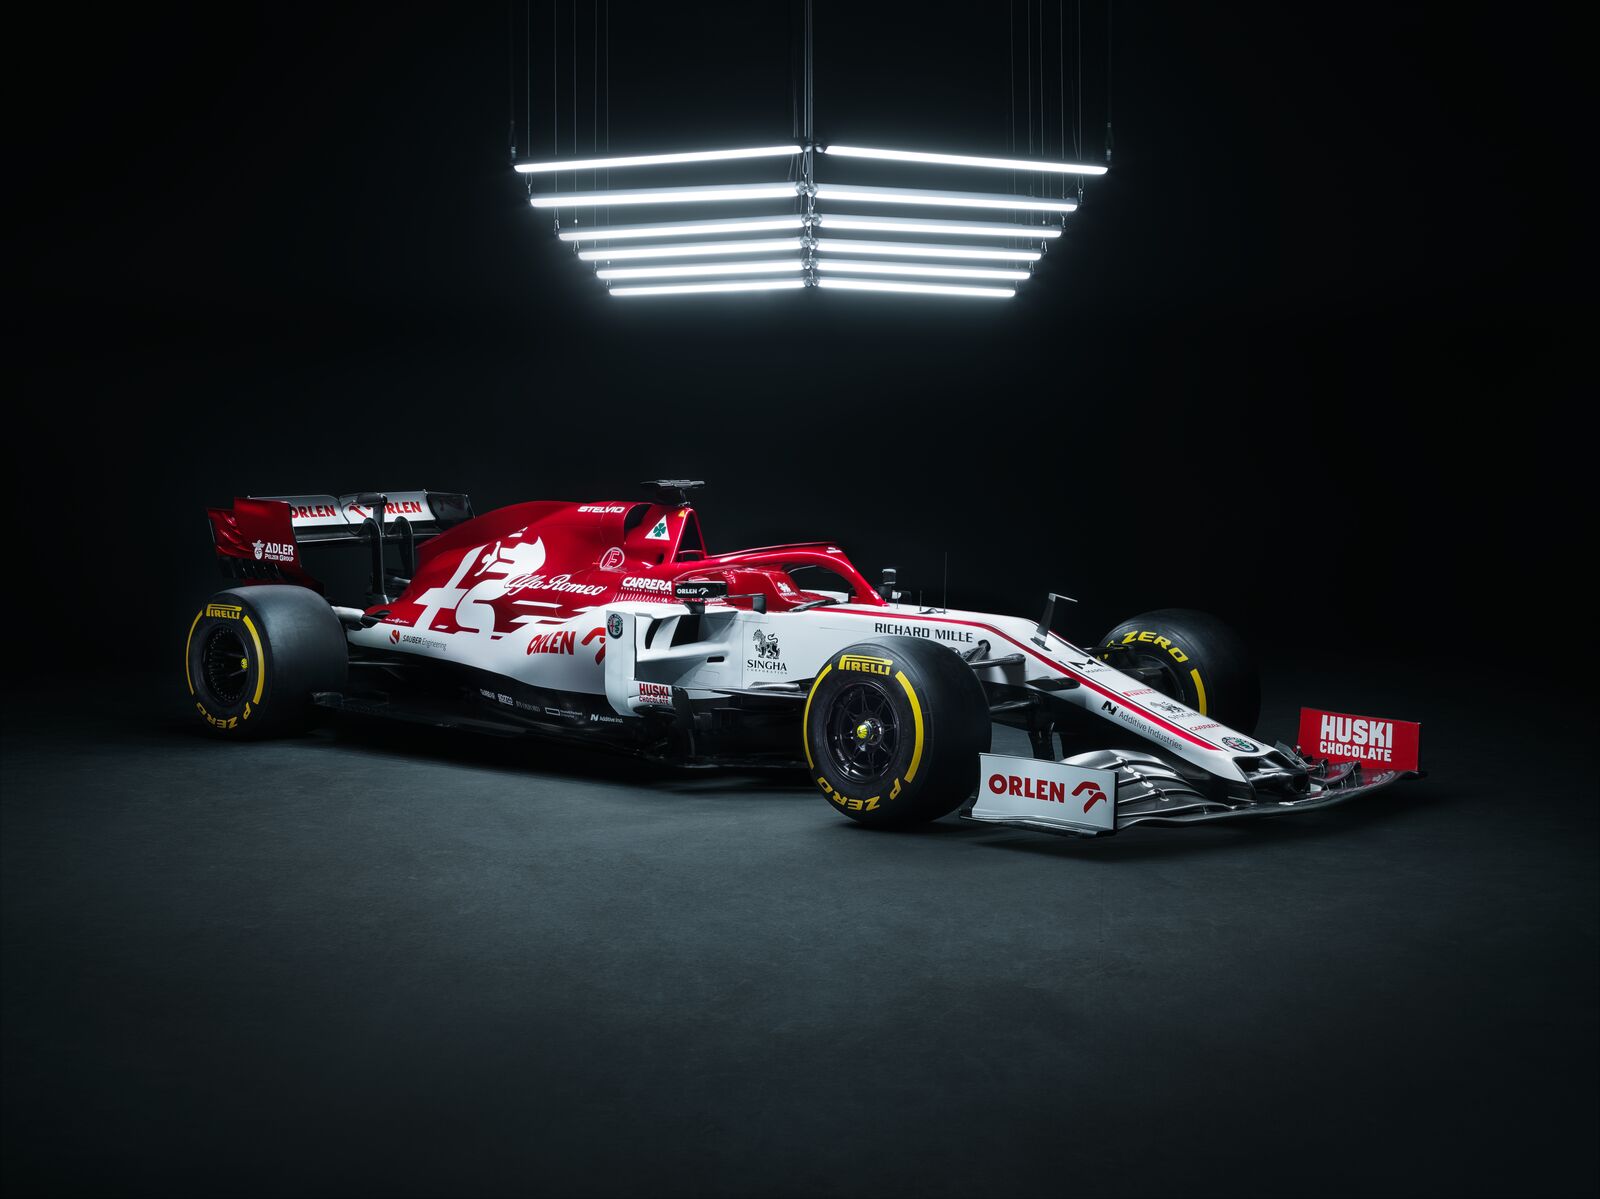 143 metal parts have been 3D printed to help create the C39 Alfa Romeo F1 racecar.